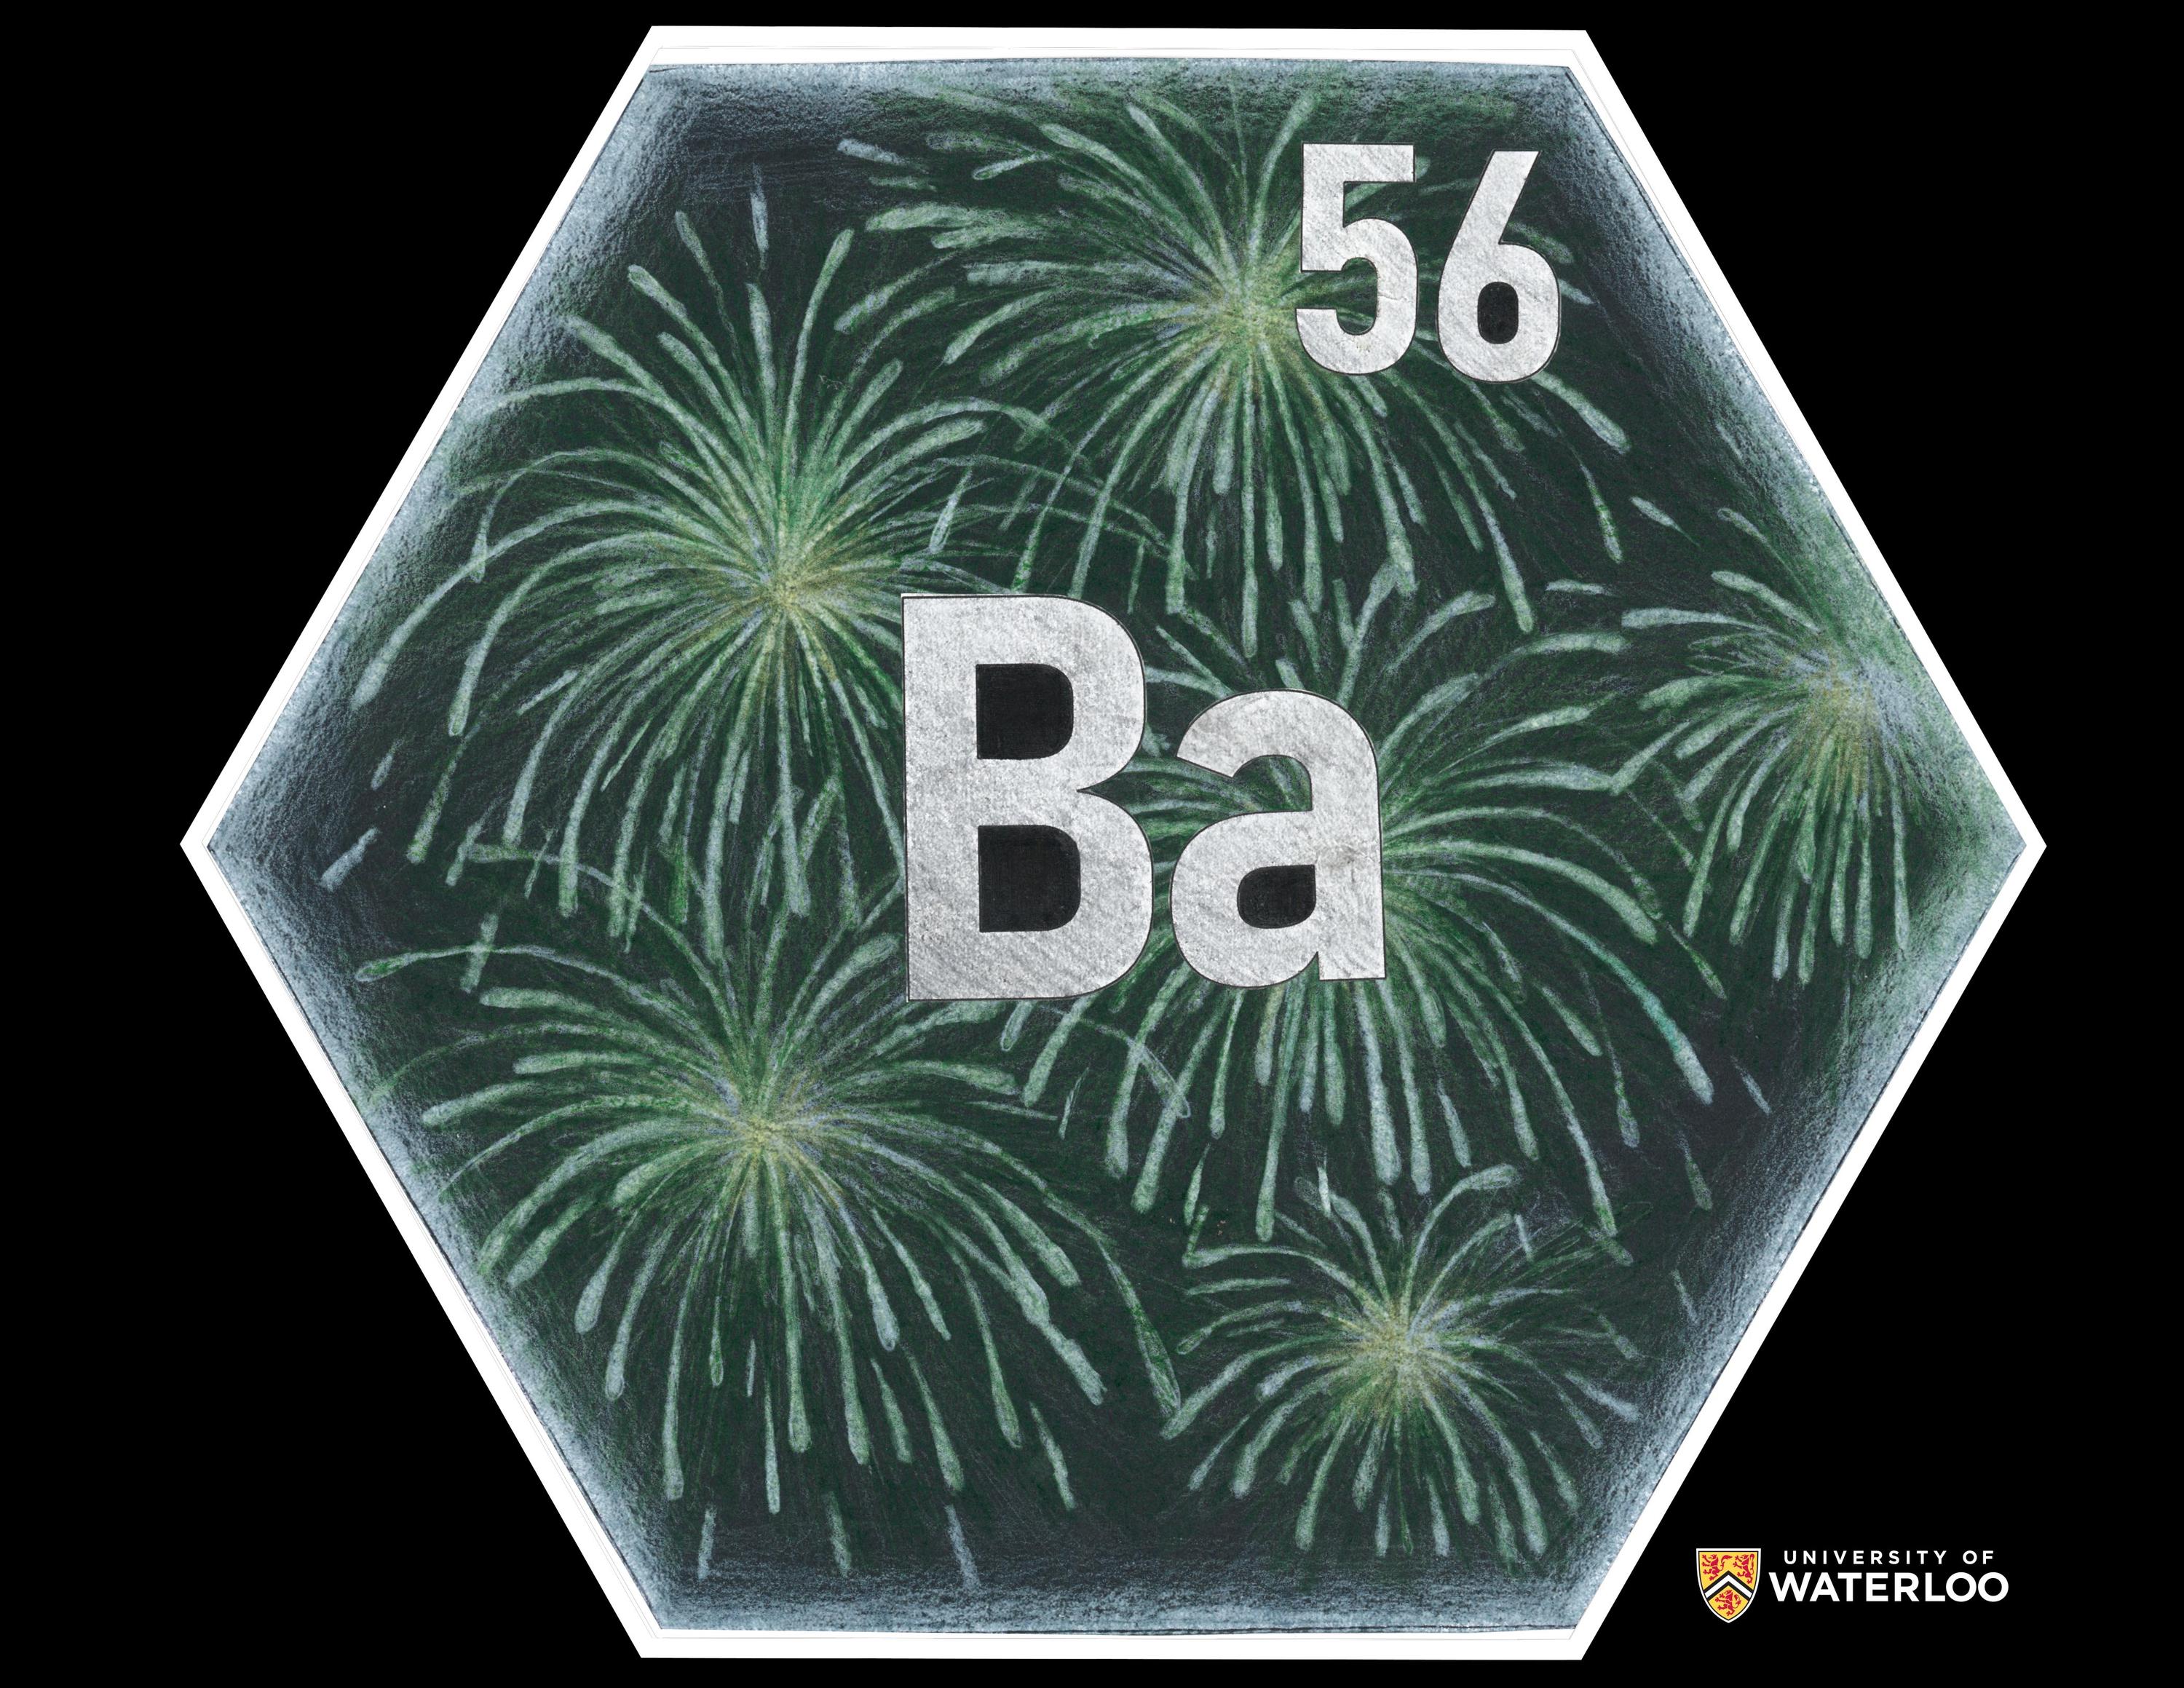 Collage with coloured pencil illustrations on black background. Chemical symbol “Ba” and atomic number “56” are centre. In the background are green and white fireworks.